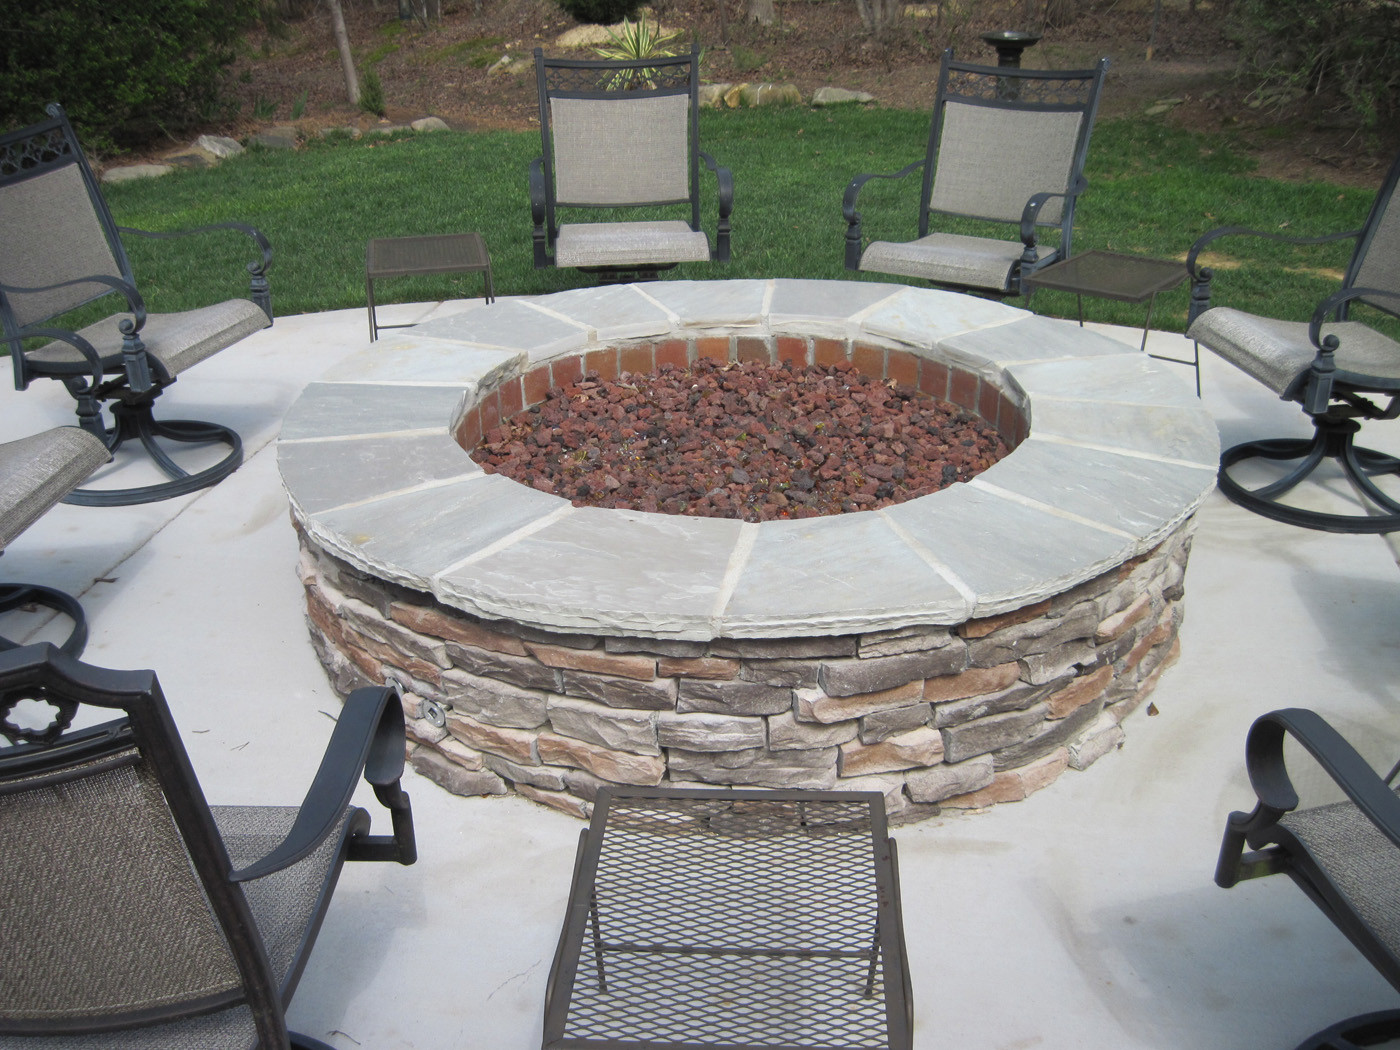 Outdoor Patio Gas Fire Pit
 Your Premier Salt Lake City Outdoor Fireplace & Firepit